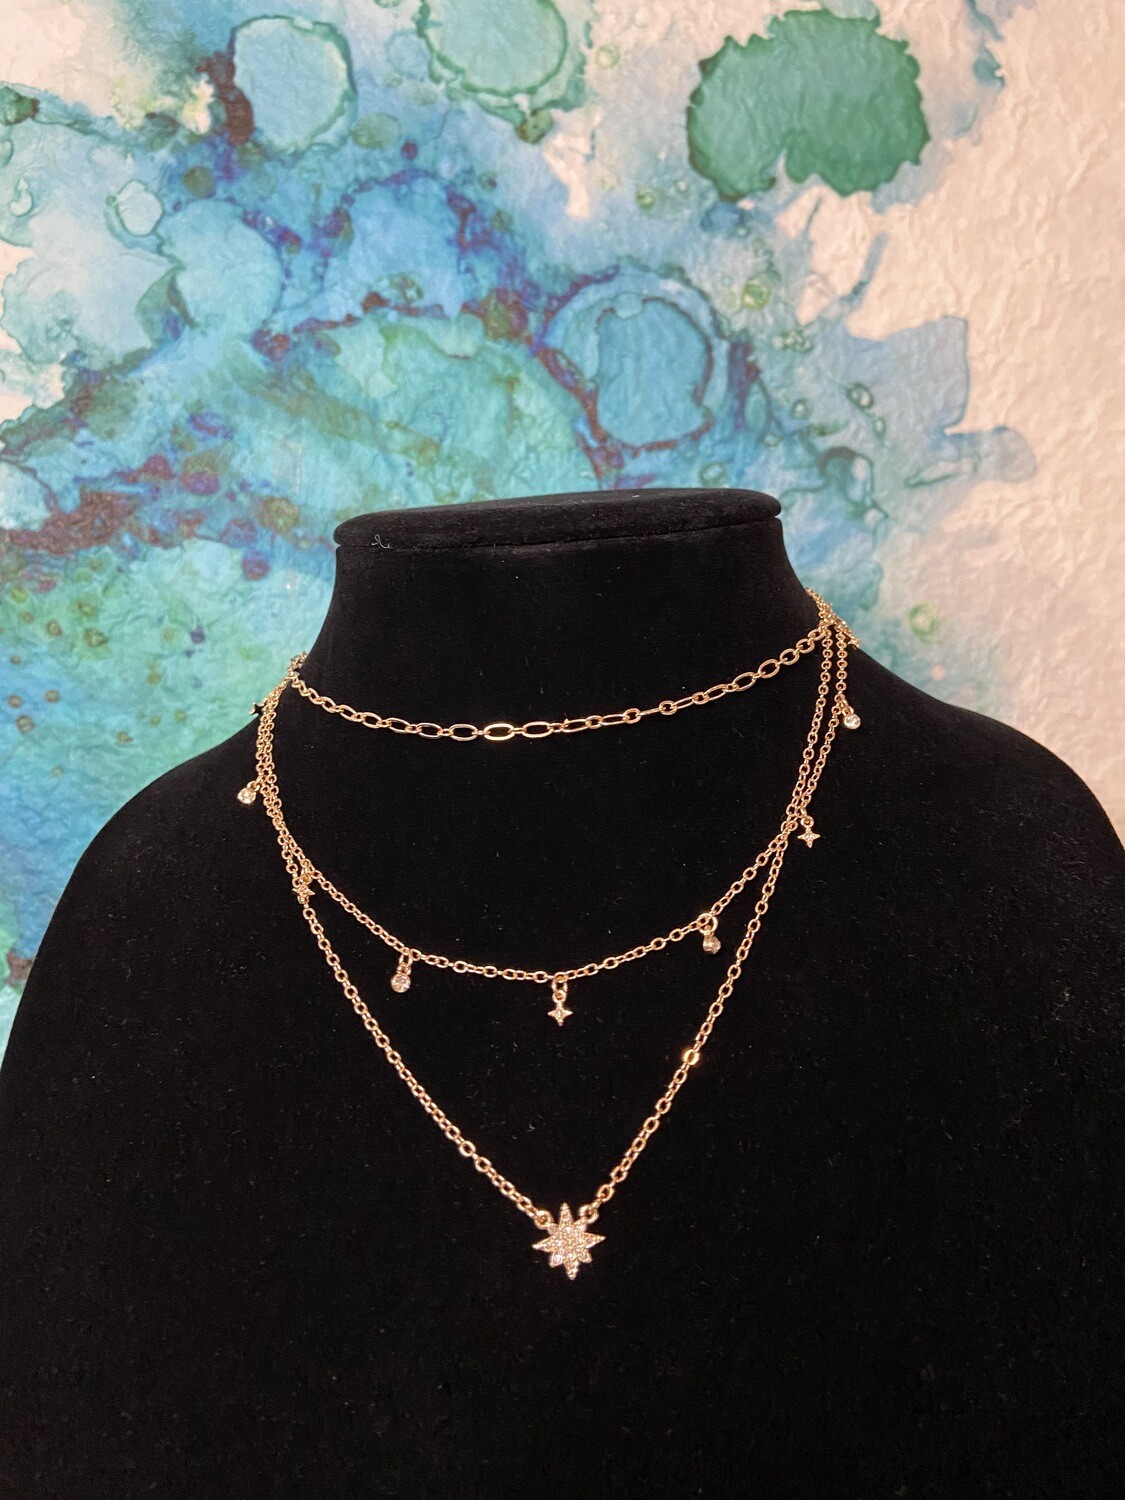 Star Dust Necklace